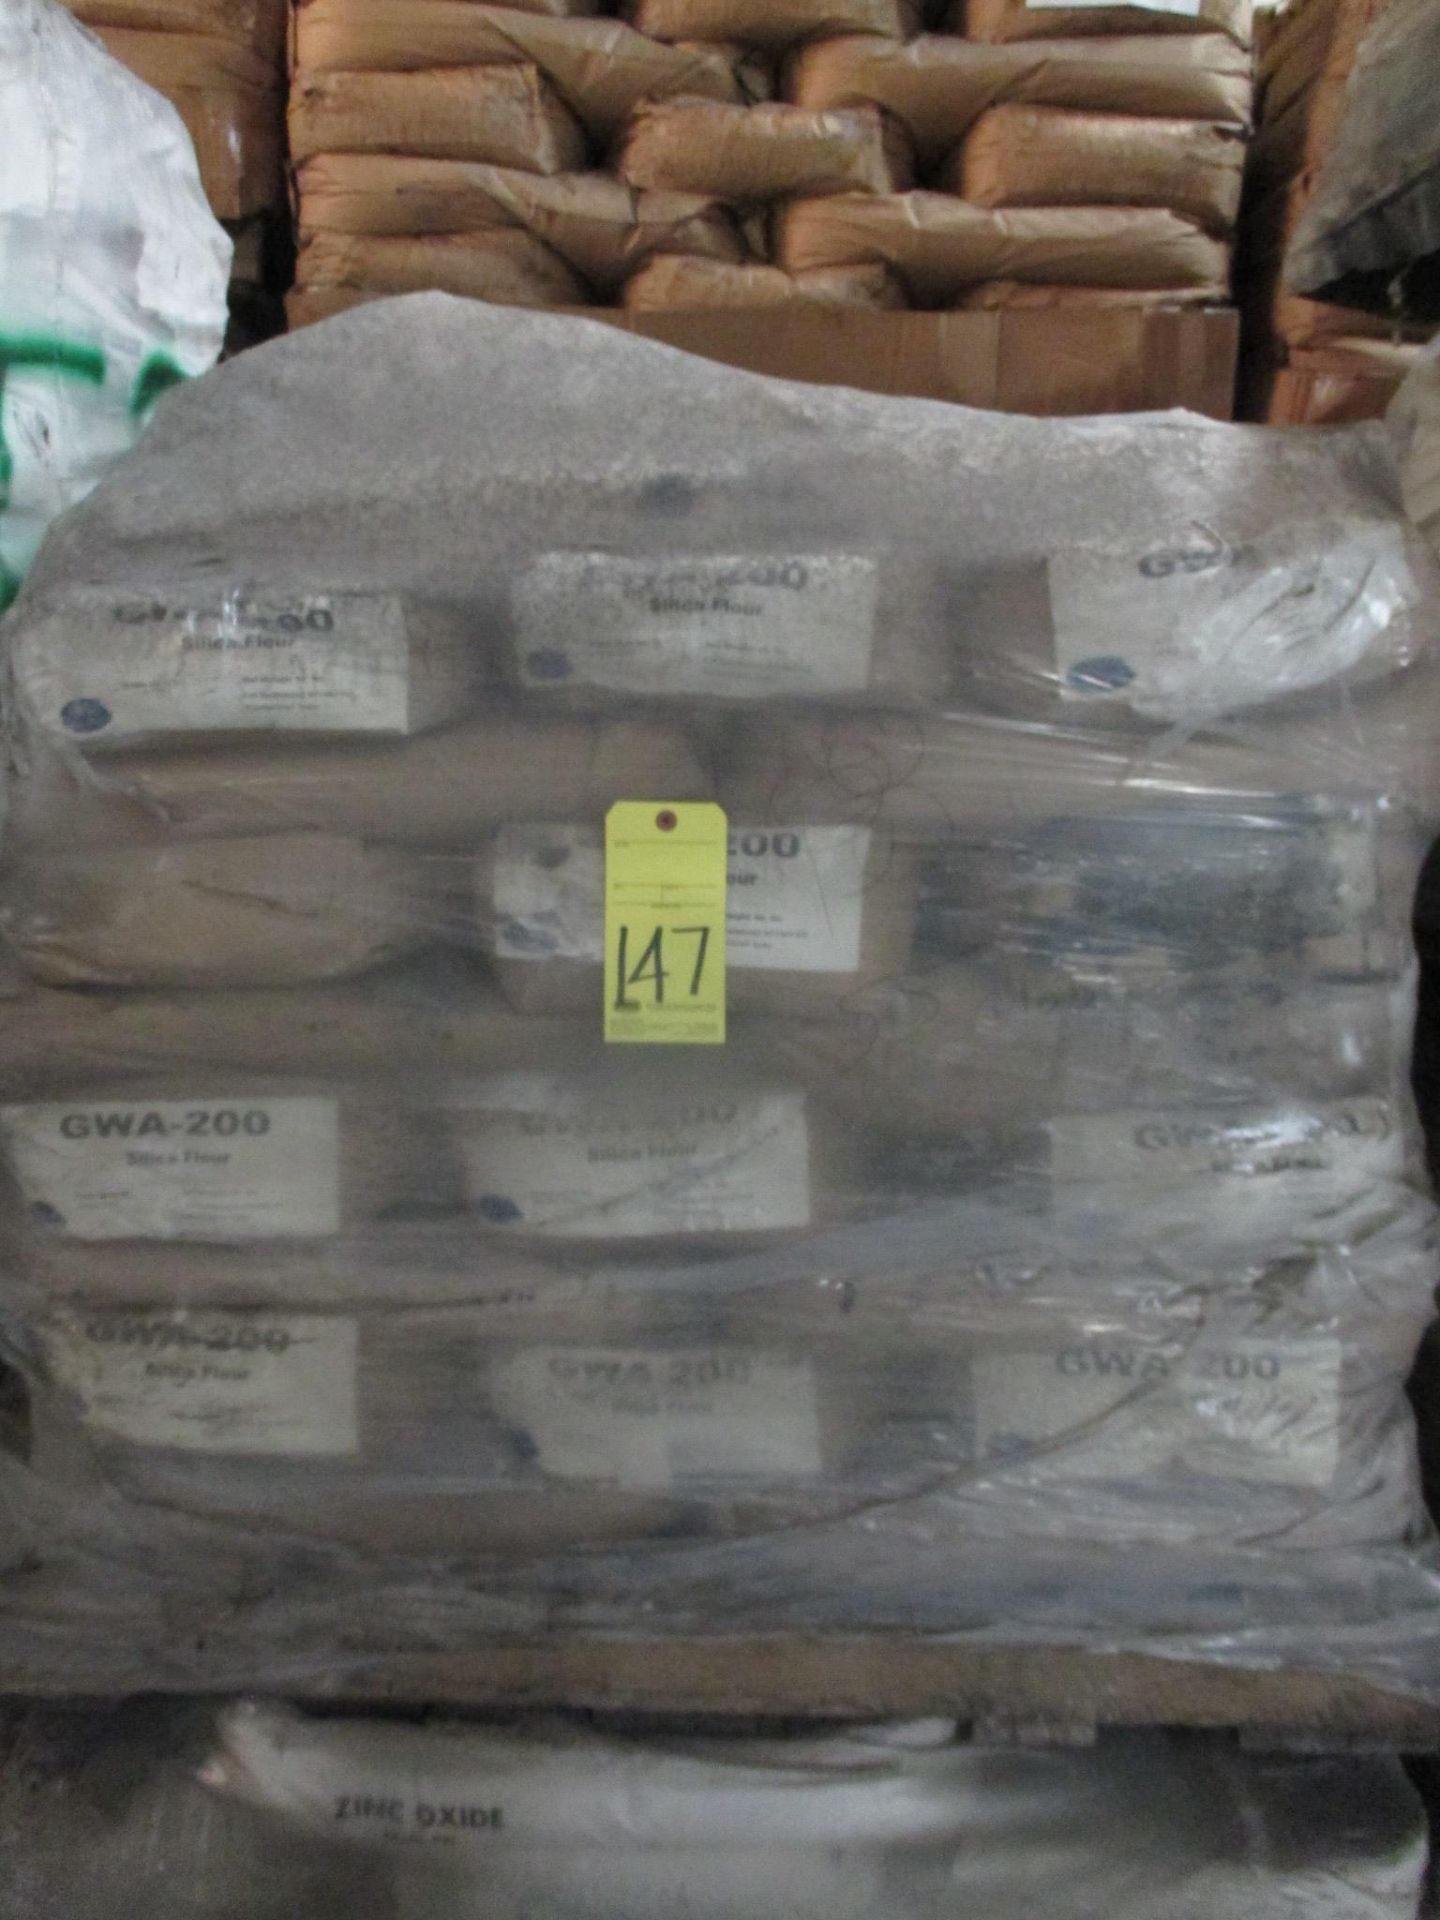 LOT OF G-W-A-200 SILICA FLOUR (approx. (48) 50 lb. bags)